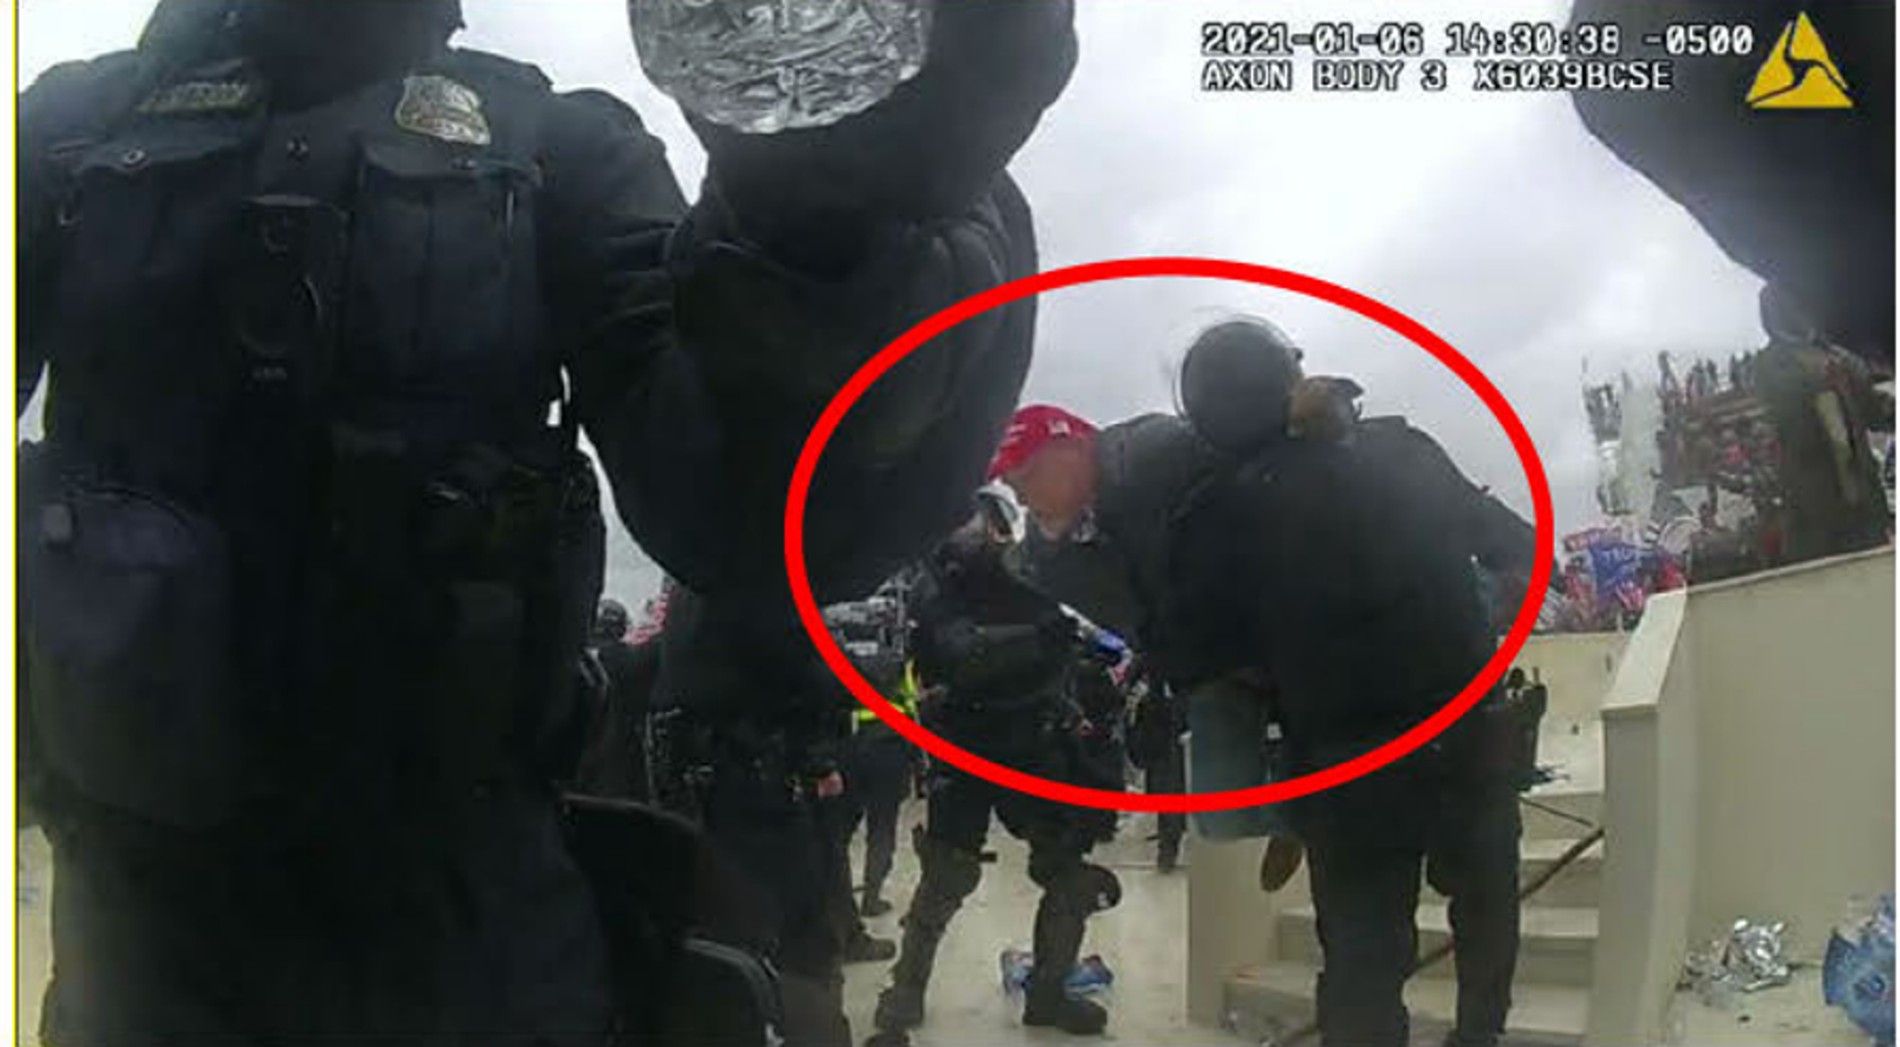 A man whom prosecutors identified as Kenneth Bonawitz is circled in red in a screen grab from a law enforcement body camera during the Jan. 6, 2021. U.S. Capitol riot. 